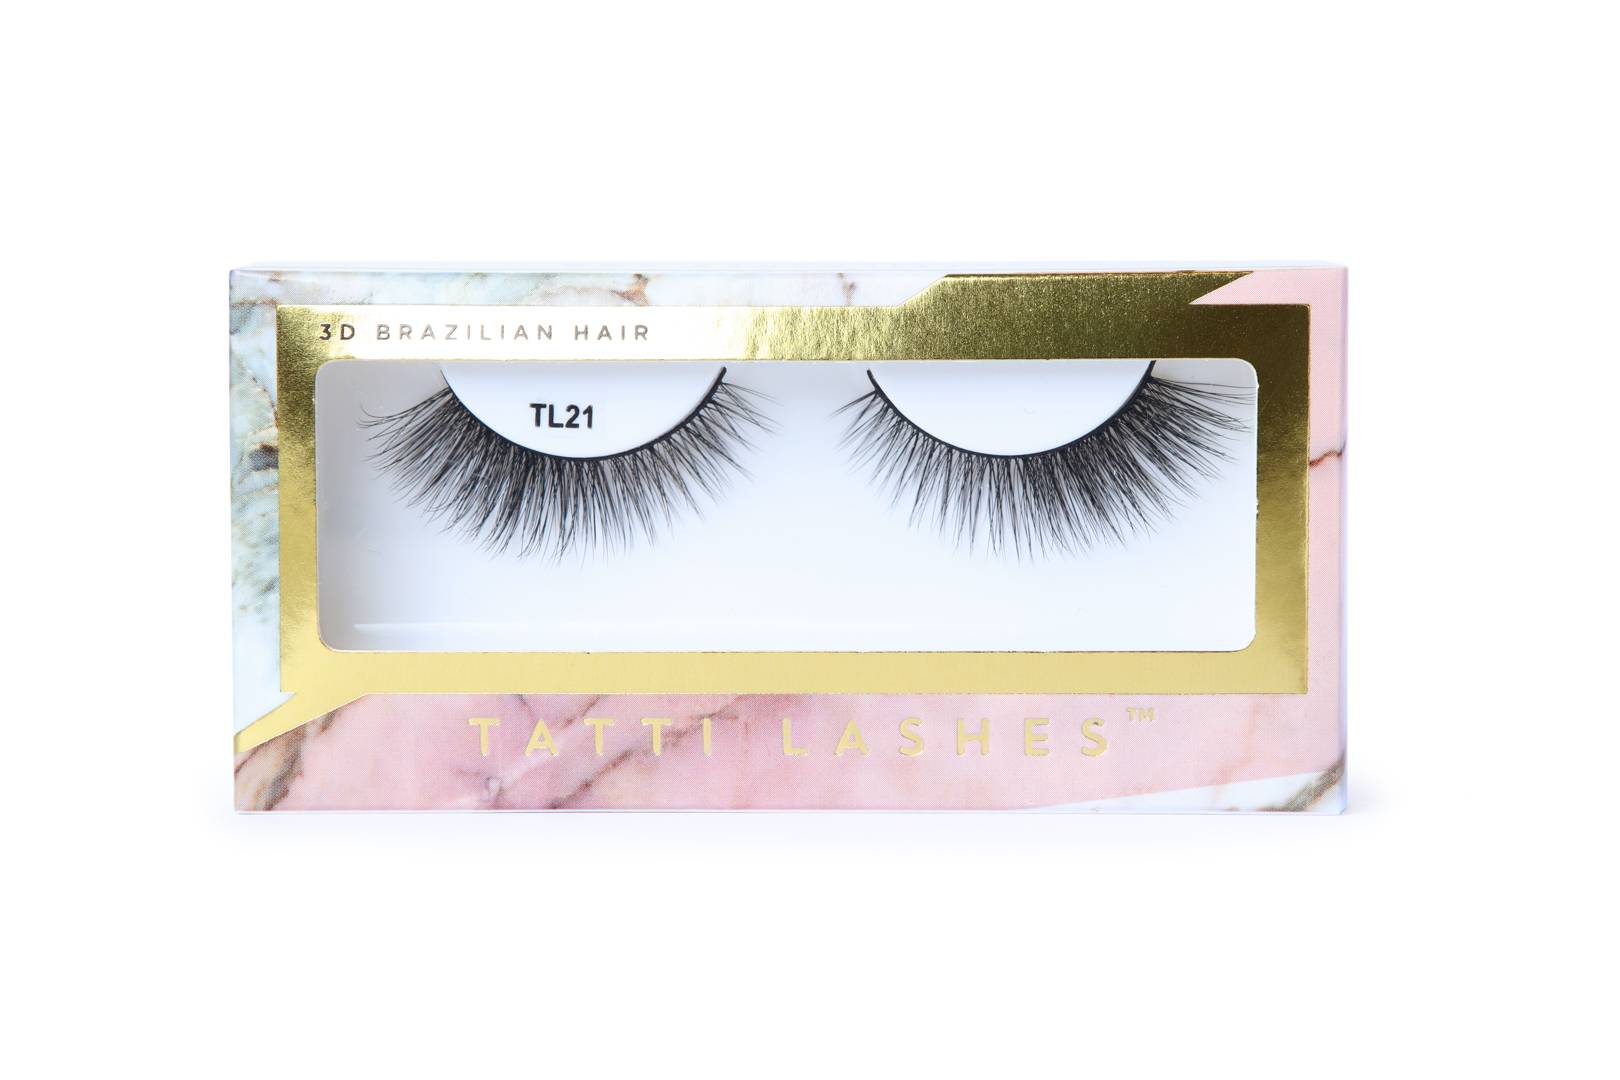 flutter lashes discount code jaclyn hill